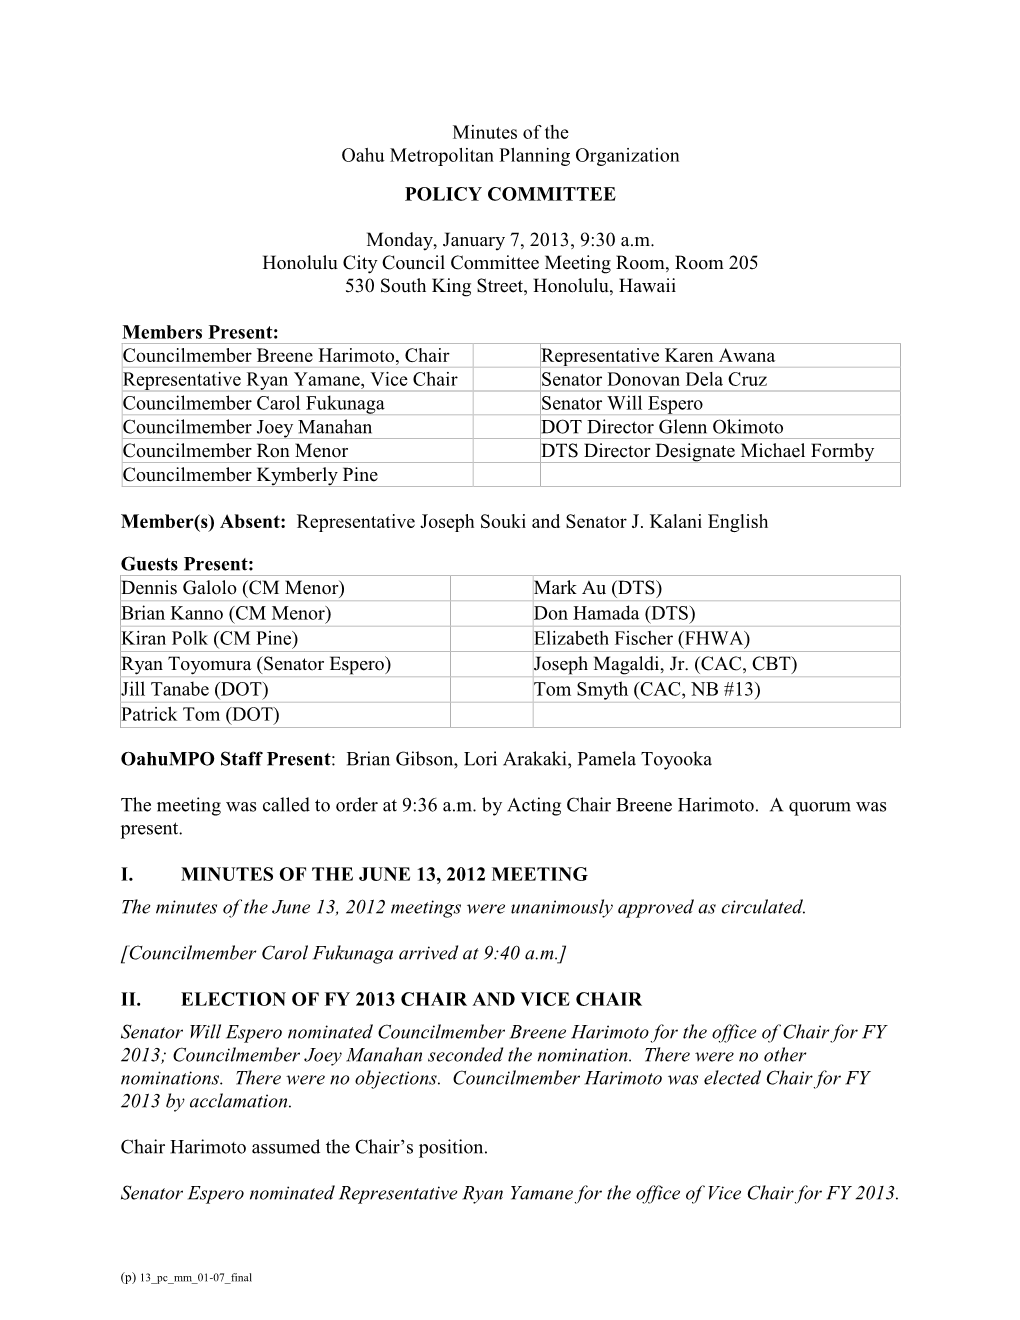 Oahumpo Policy Committee Minutes Page 2 of 3 January 7, 2013 Meeting